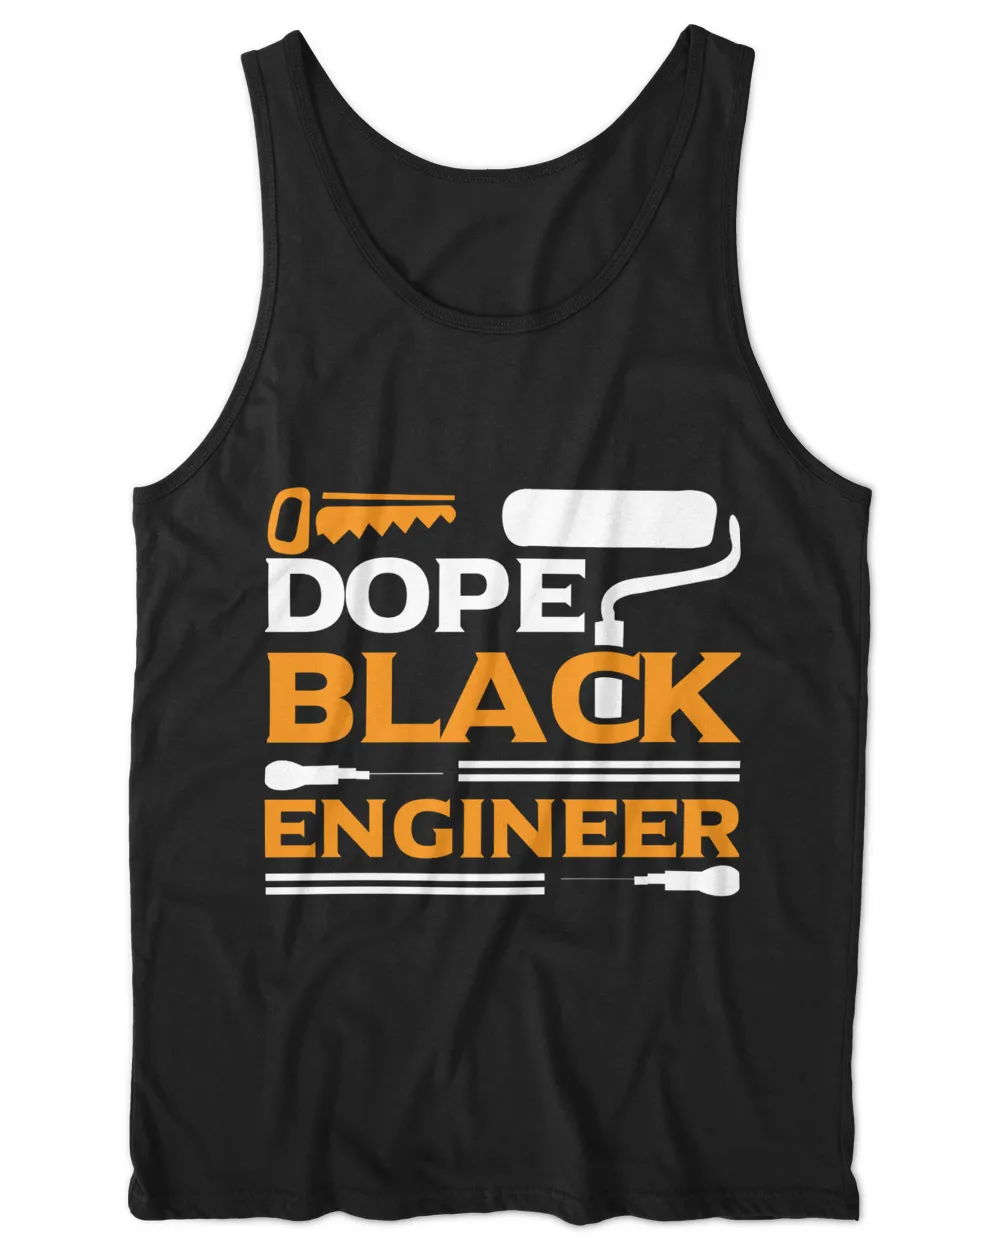 View detailEngineer Definition Funny Engineering Gift T-Shirt (3)